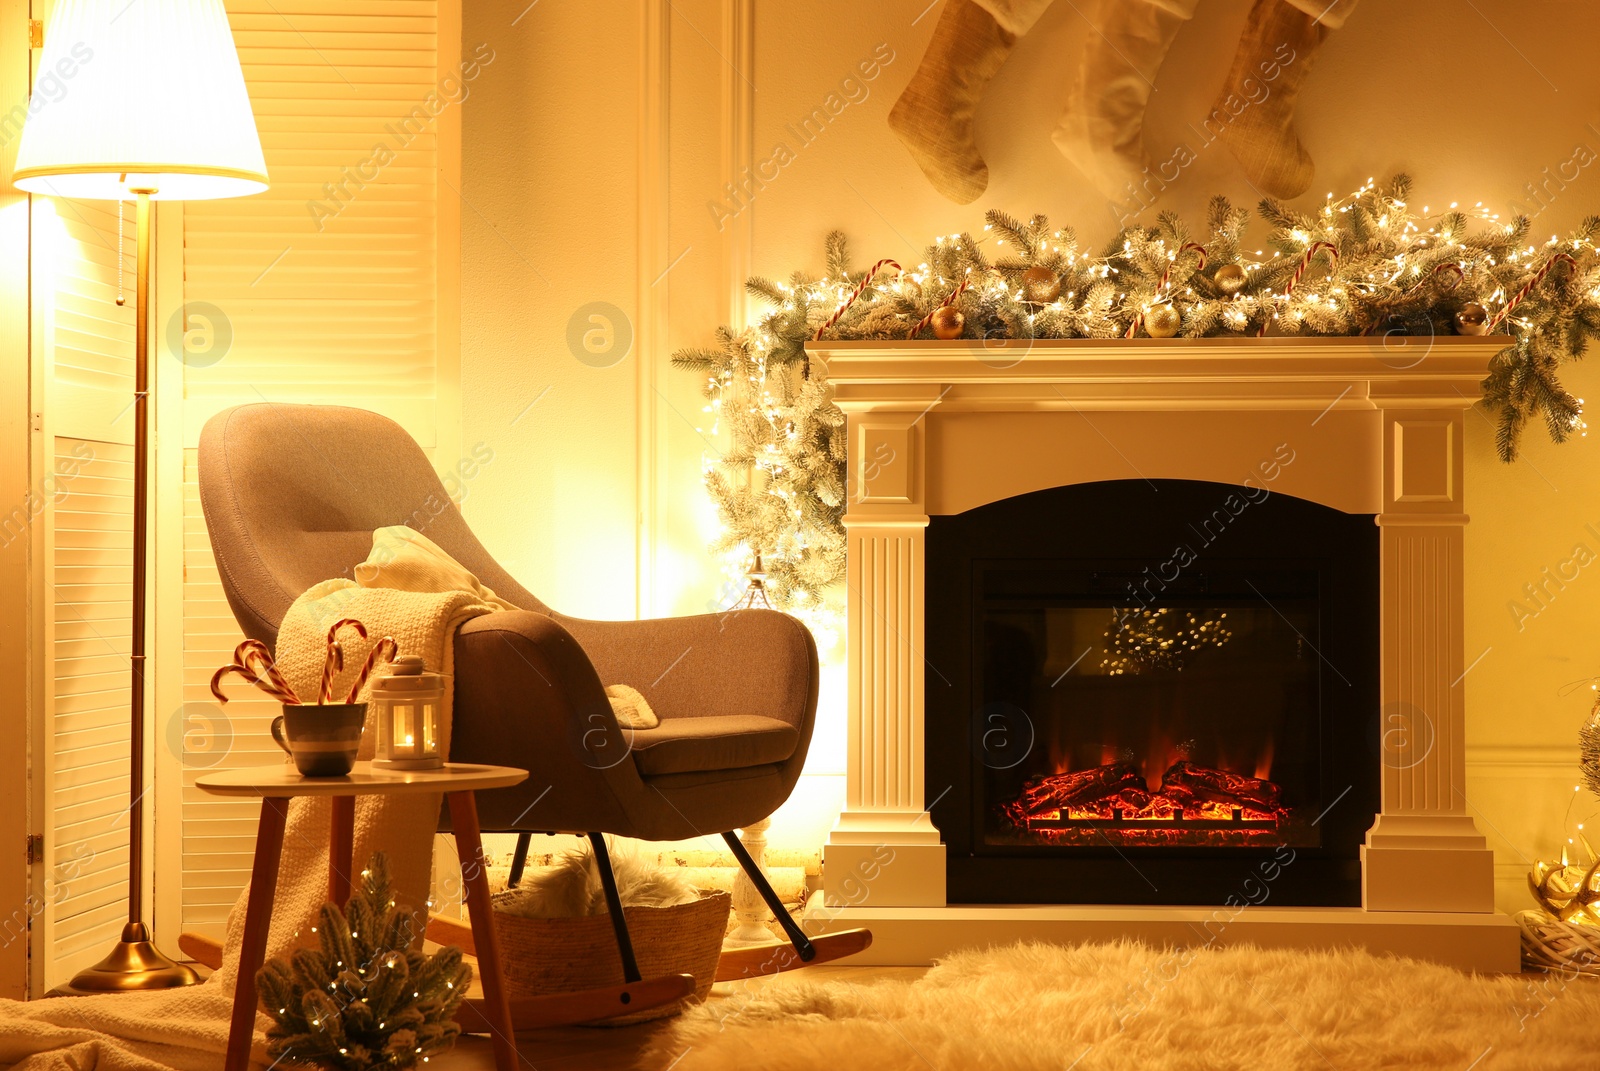 Photo of Fireplace in living room decorated for Christmas